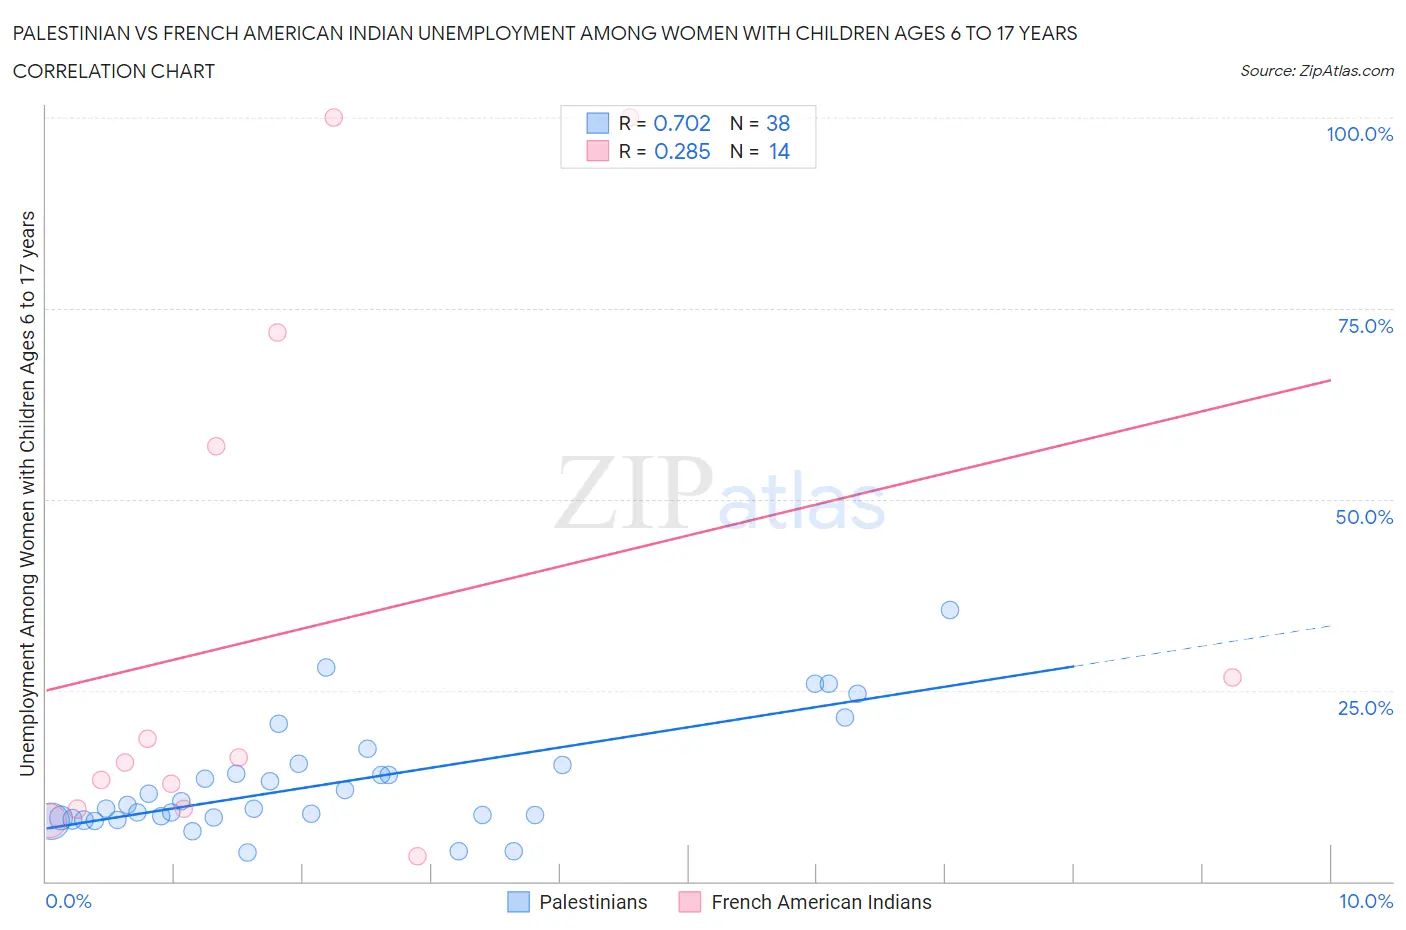 Palestinian vs French American Indian Unemployment Among Women with Children Ages 6 to 17 years